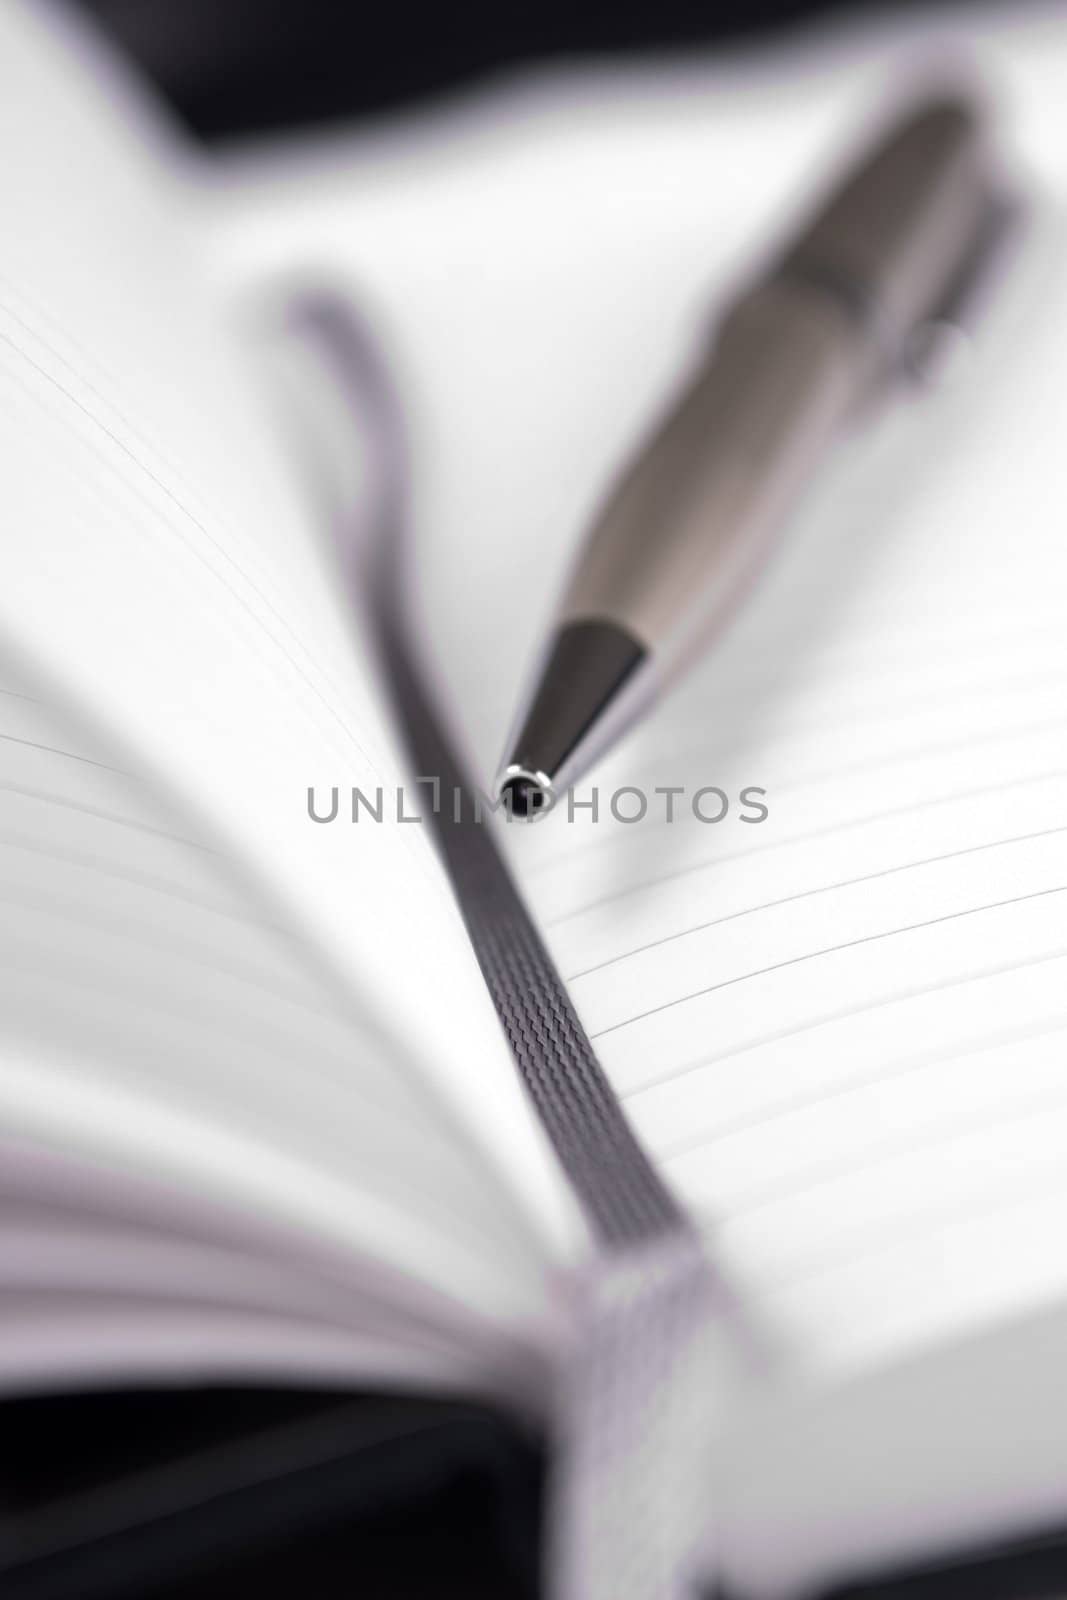 A notebook and pen. Photographet with a small depth of field.